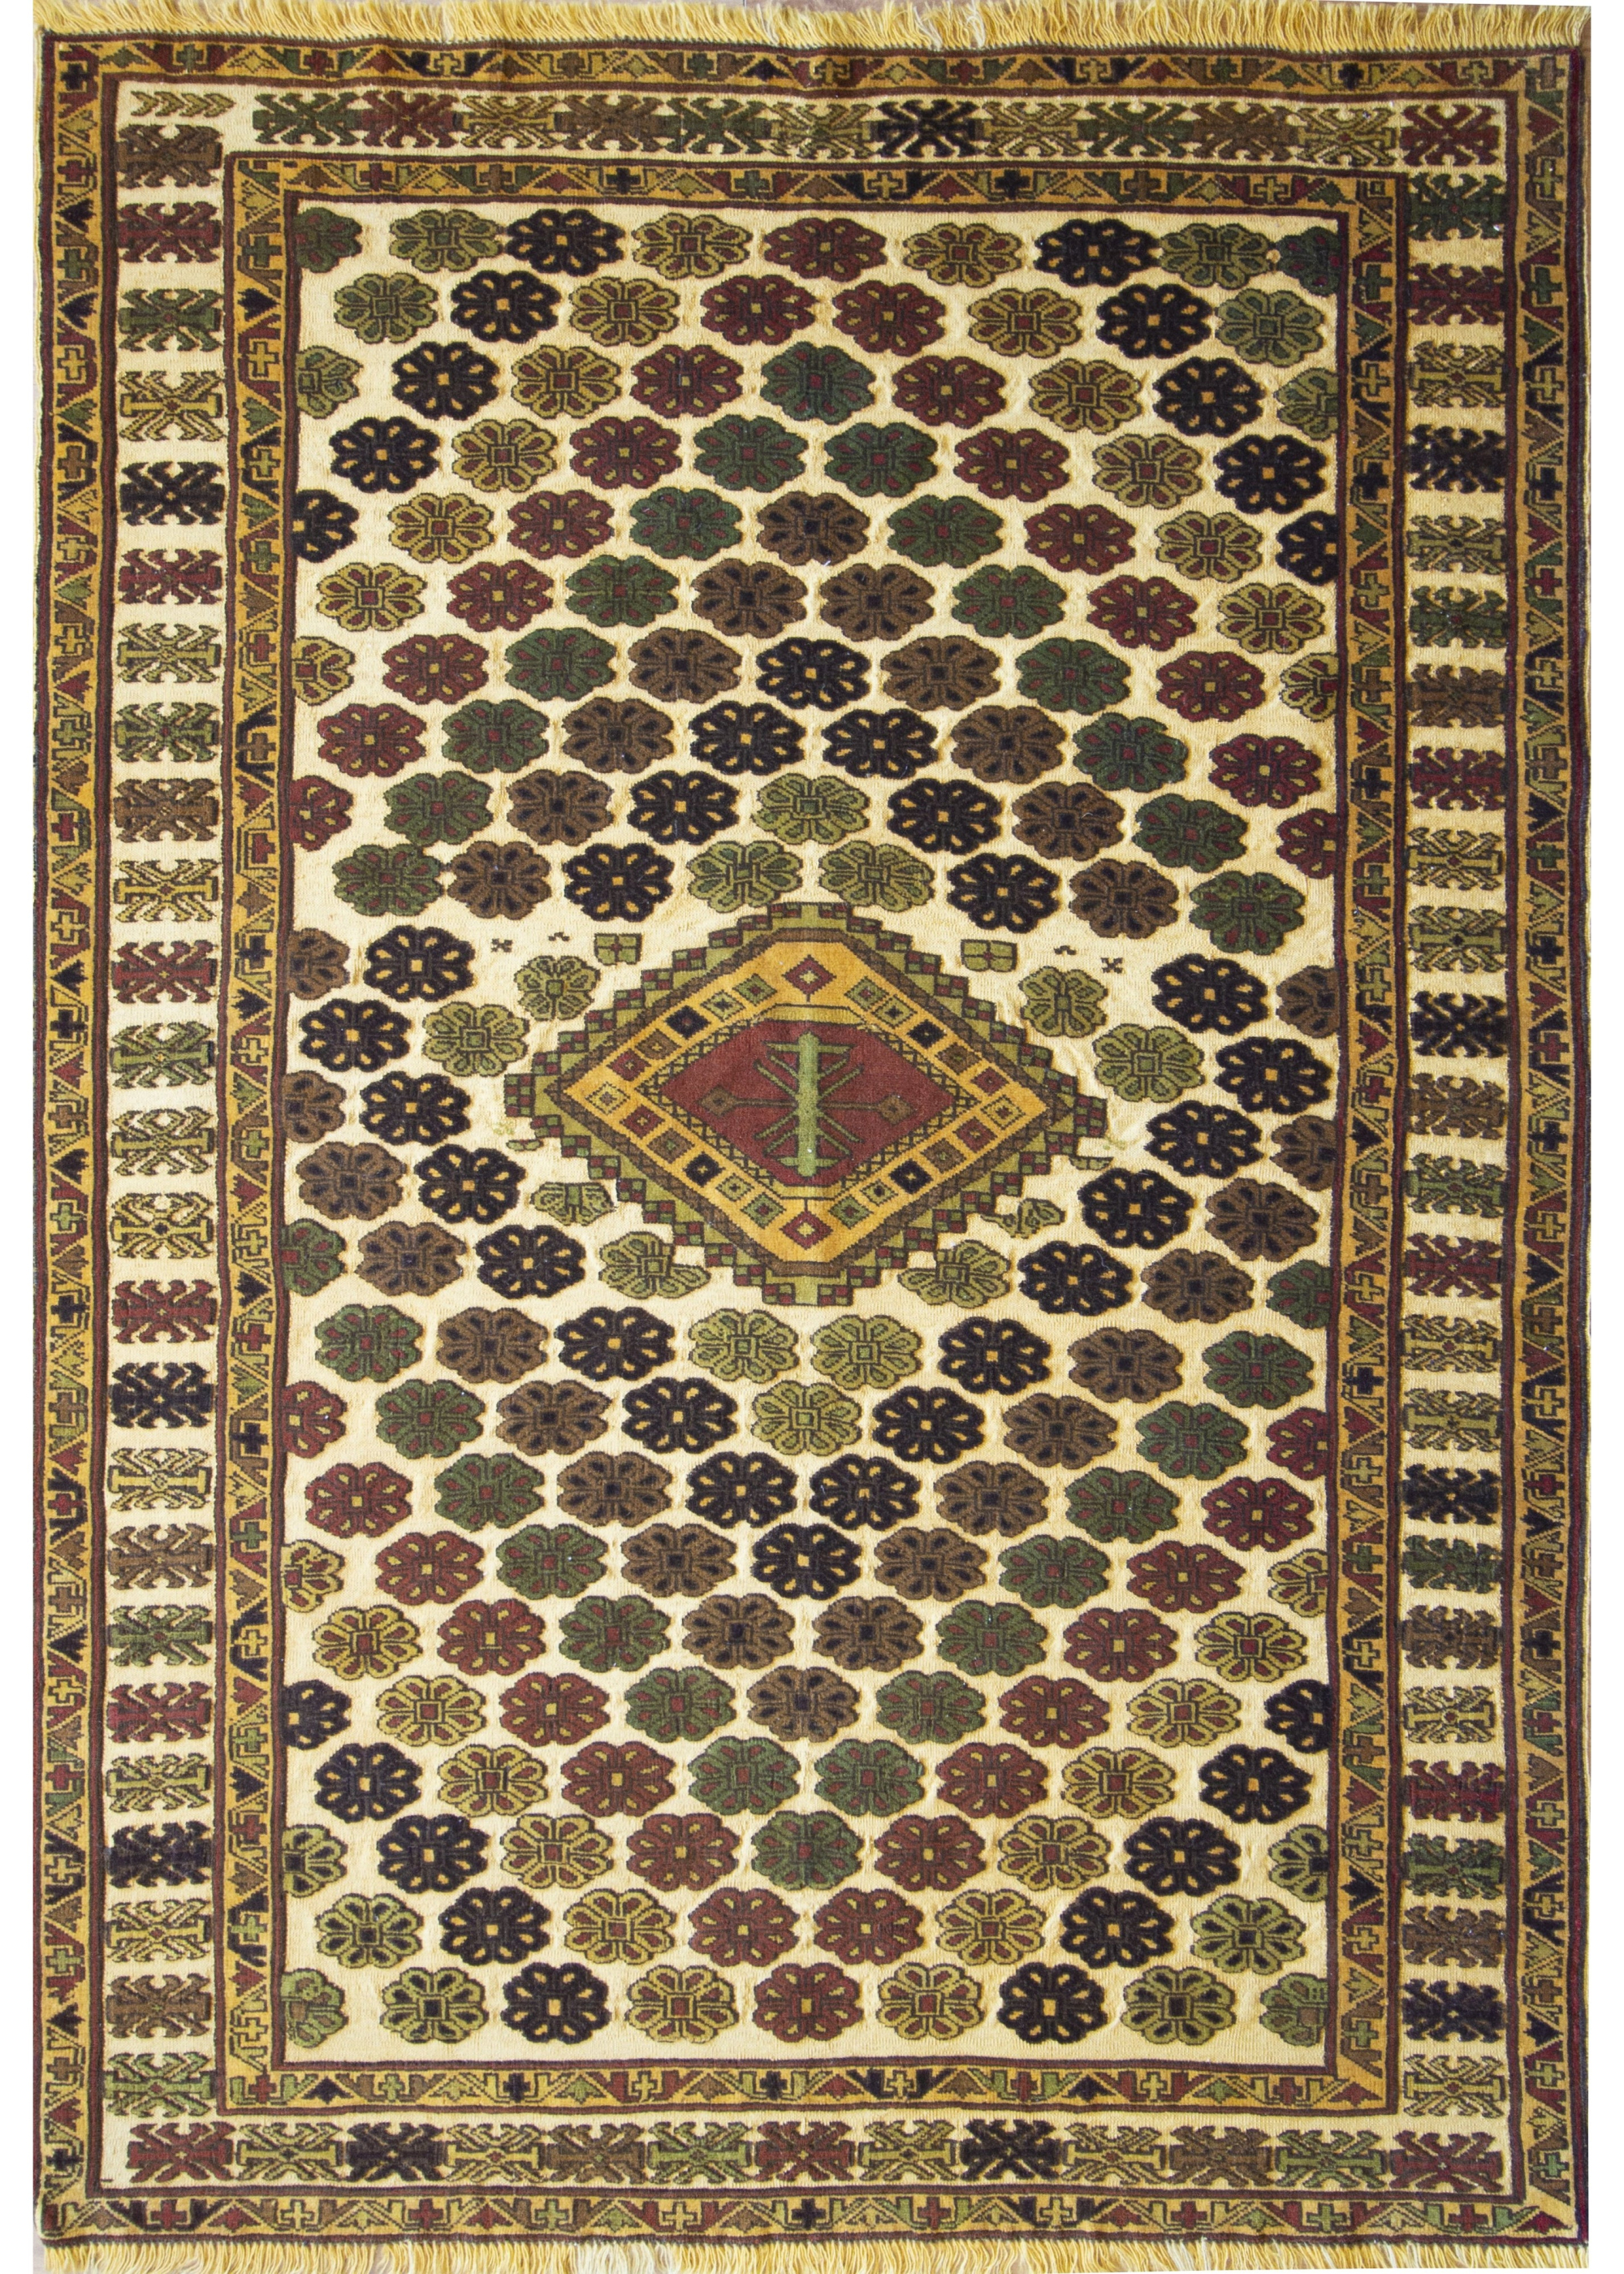 Area rug for living space and any room. Floor decor, rugs and carpets from Tabrizi Rugs. Gouchan 220 - 3'11